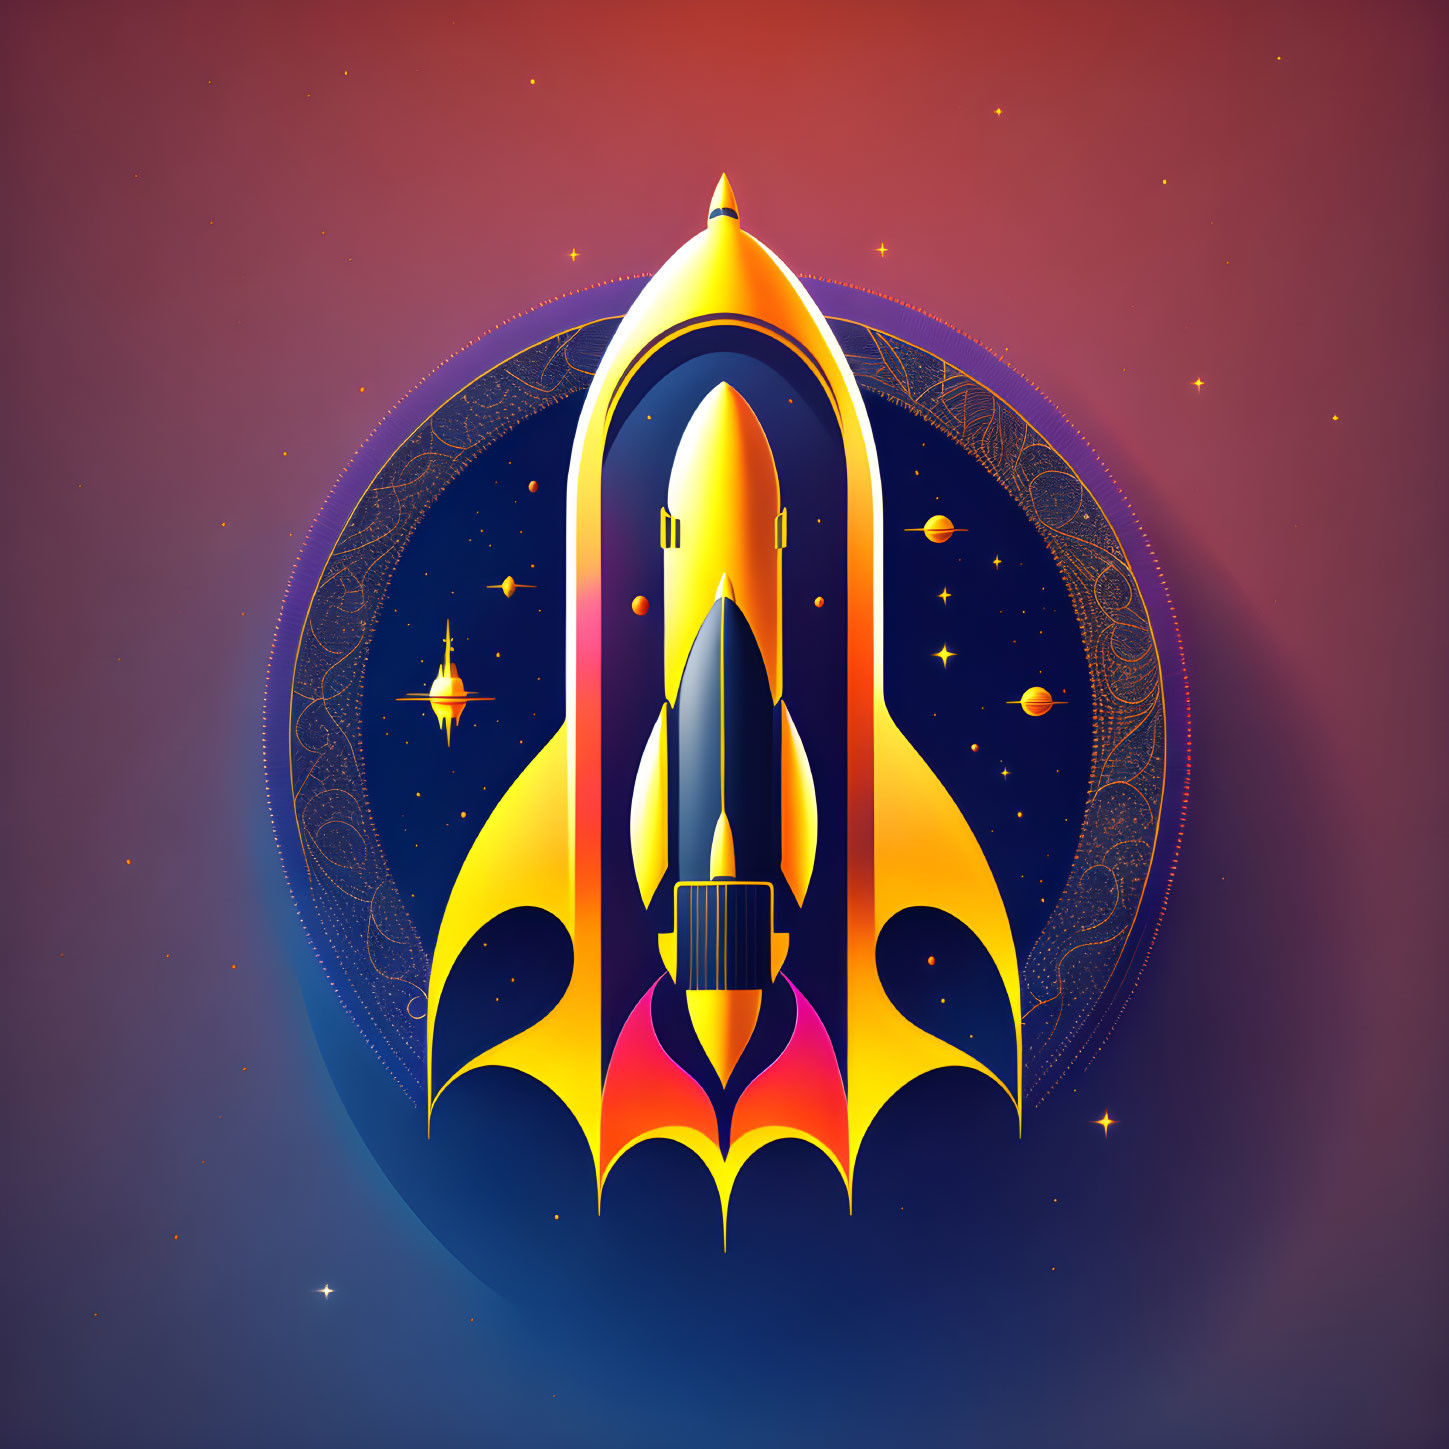 Vibrant space shuttle launch illustration with cosmic background